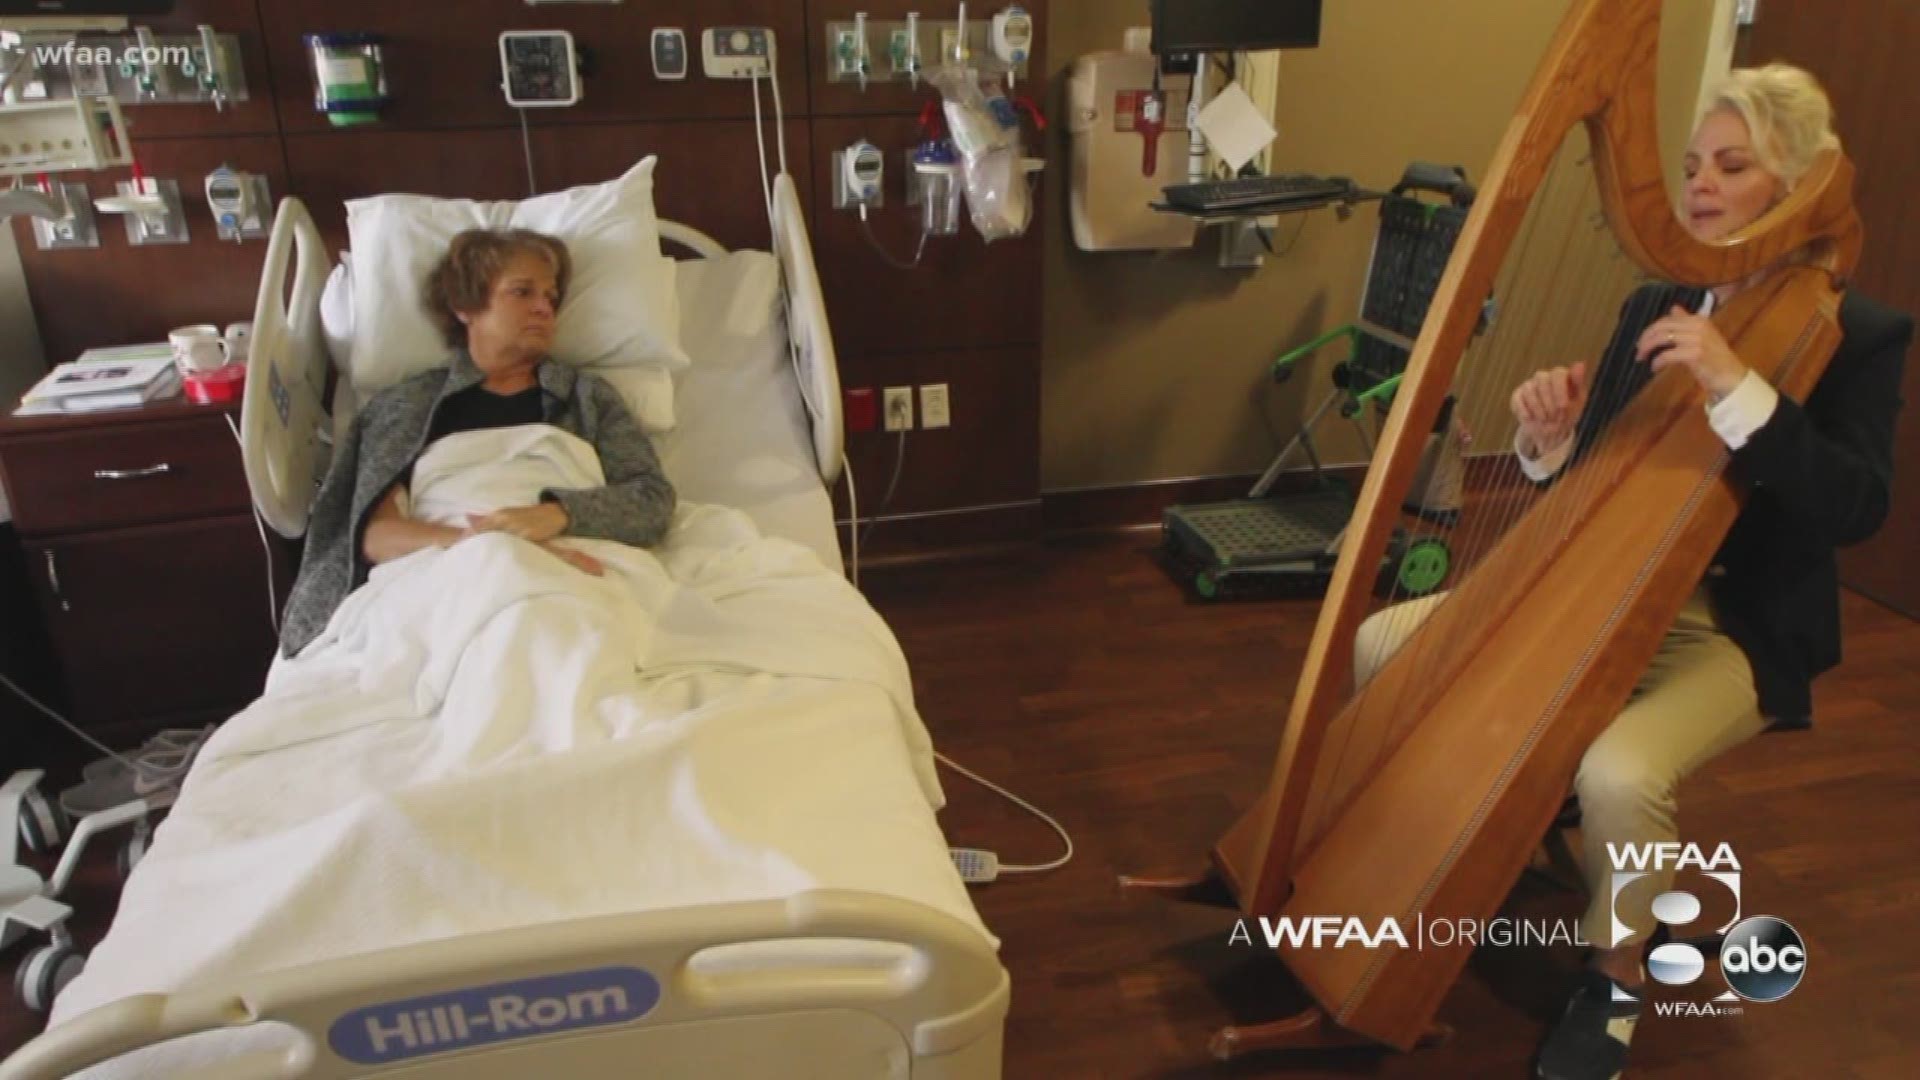 Meet the musician who brings peace to patients at the end of life